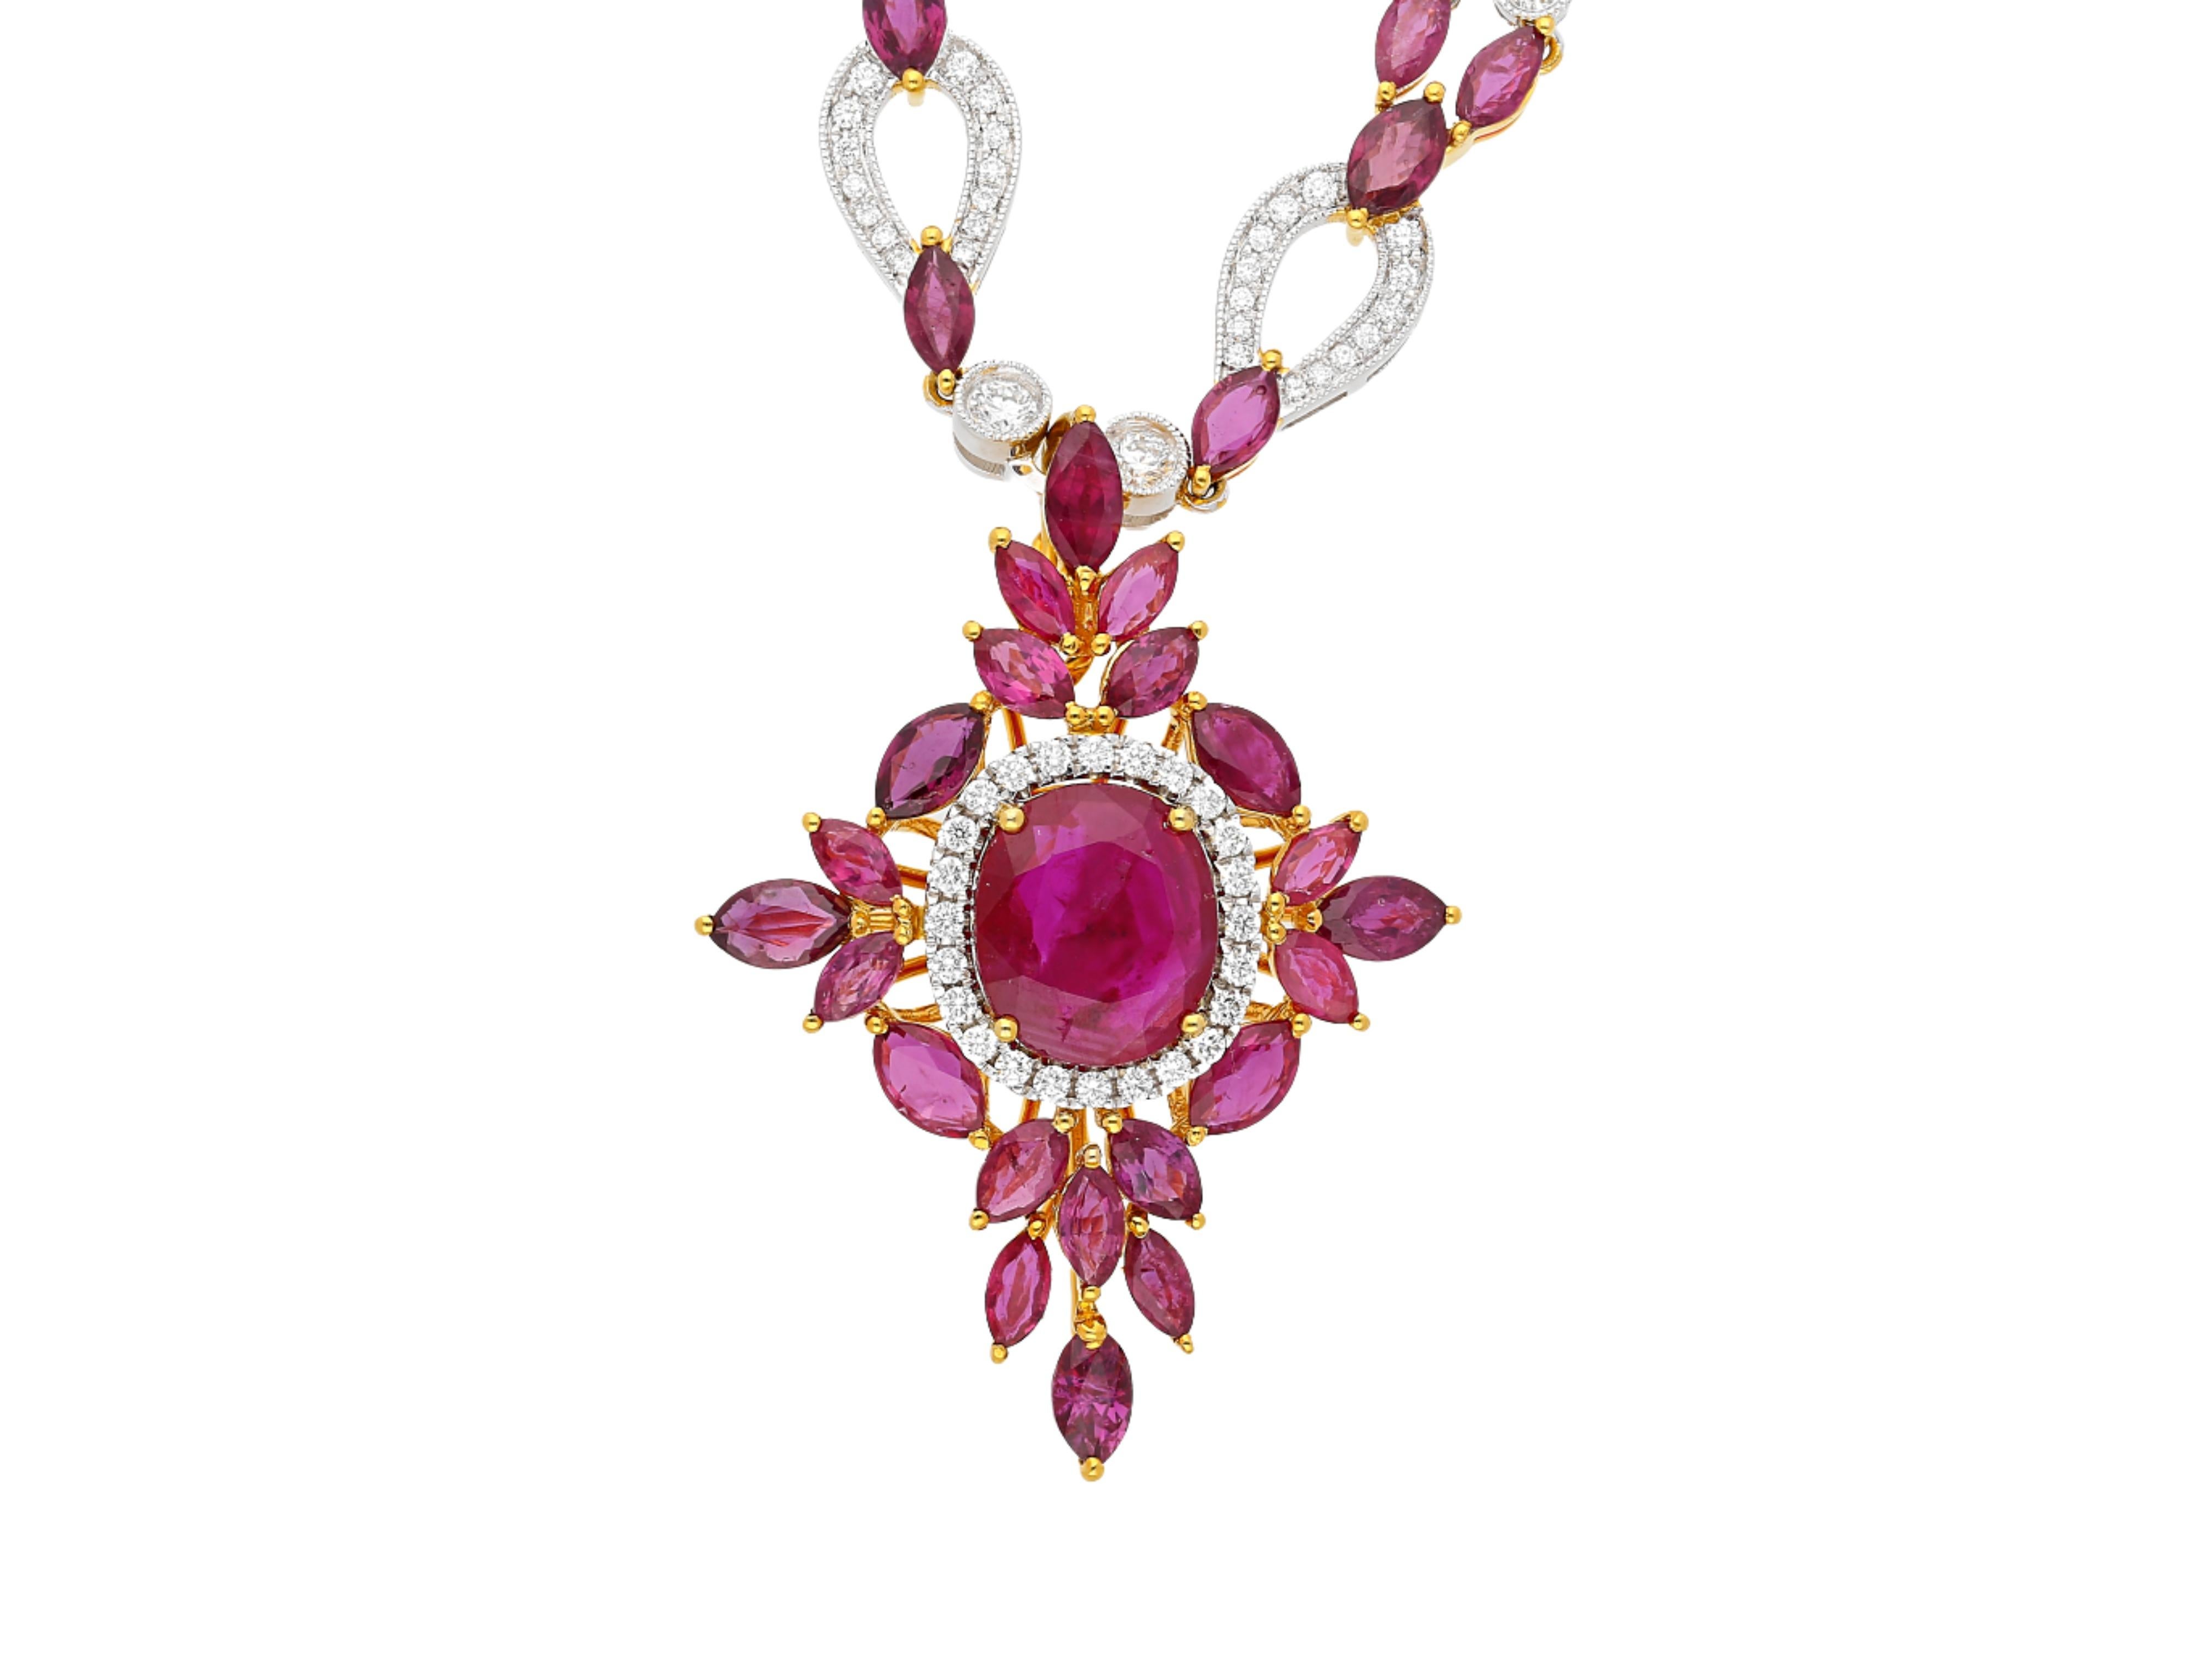 15.66 carat Ruby and 3.17 carat Diamond mixed cut cross pendant necklace. Set in a two tone 18 karat yellow and white gold. Featuring a 2.35 carat oval cut center stone, 67 mixed cut Ruby accents of 13.31 carats, and 226 round cut diamonds of 3.17